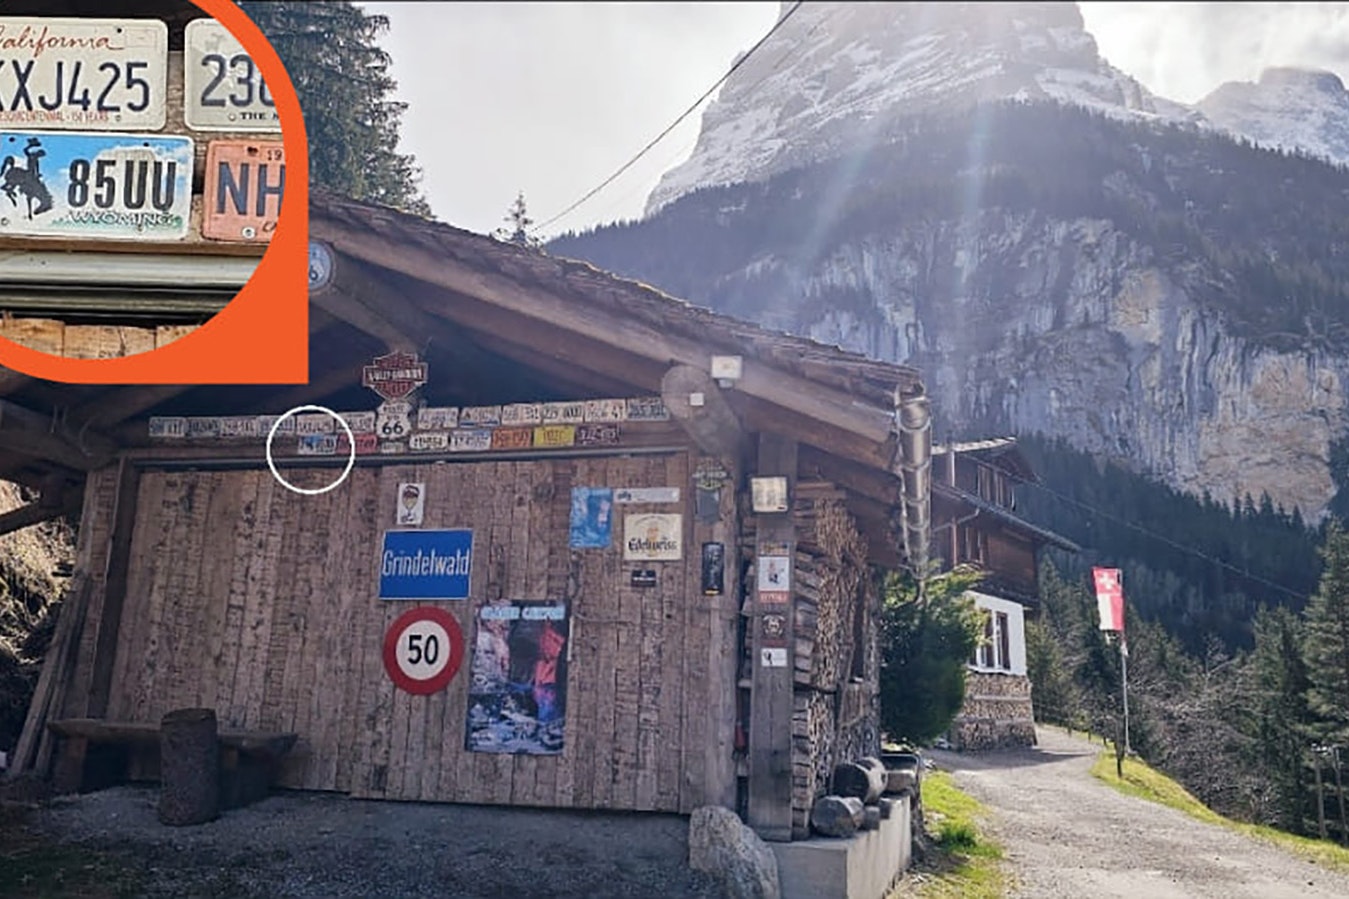 This photo shared on Facebook by Cheyenne resident Monica Taylor Lee shows a Wyoming license plate from Laramie County on the outside wall of a seasonal restaurant in the Swiss Alps.